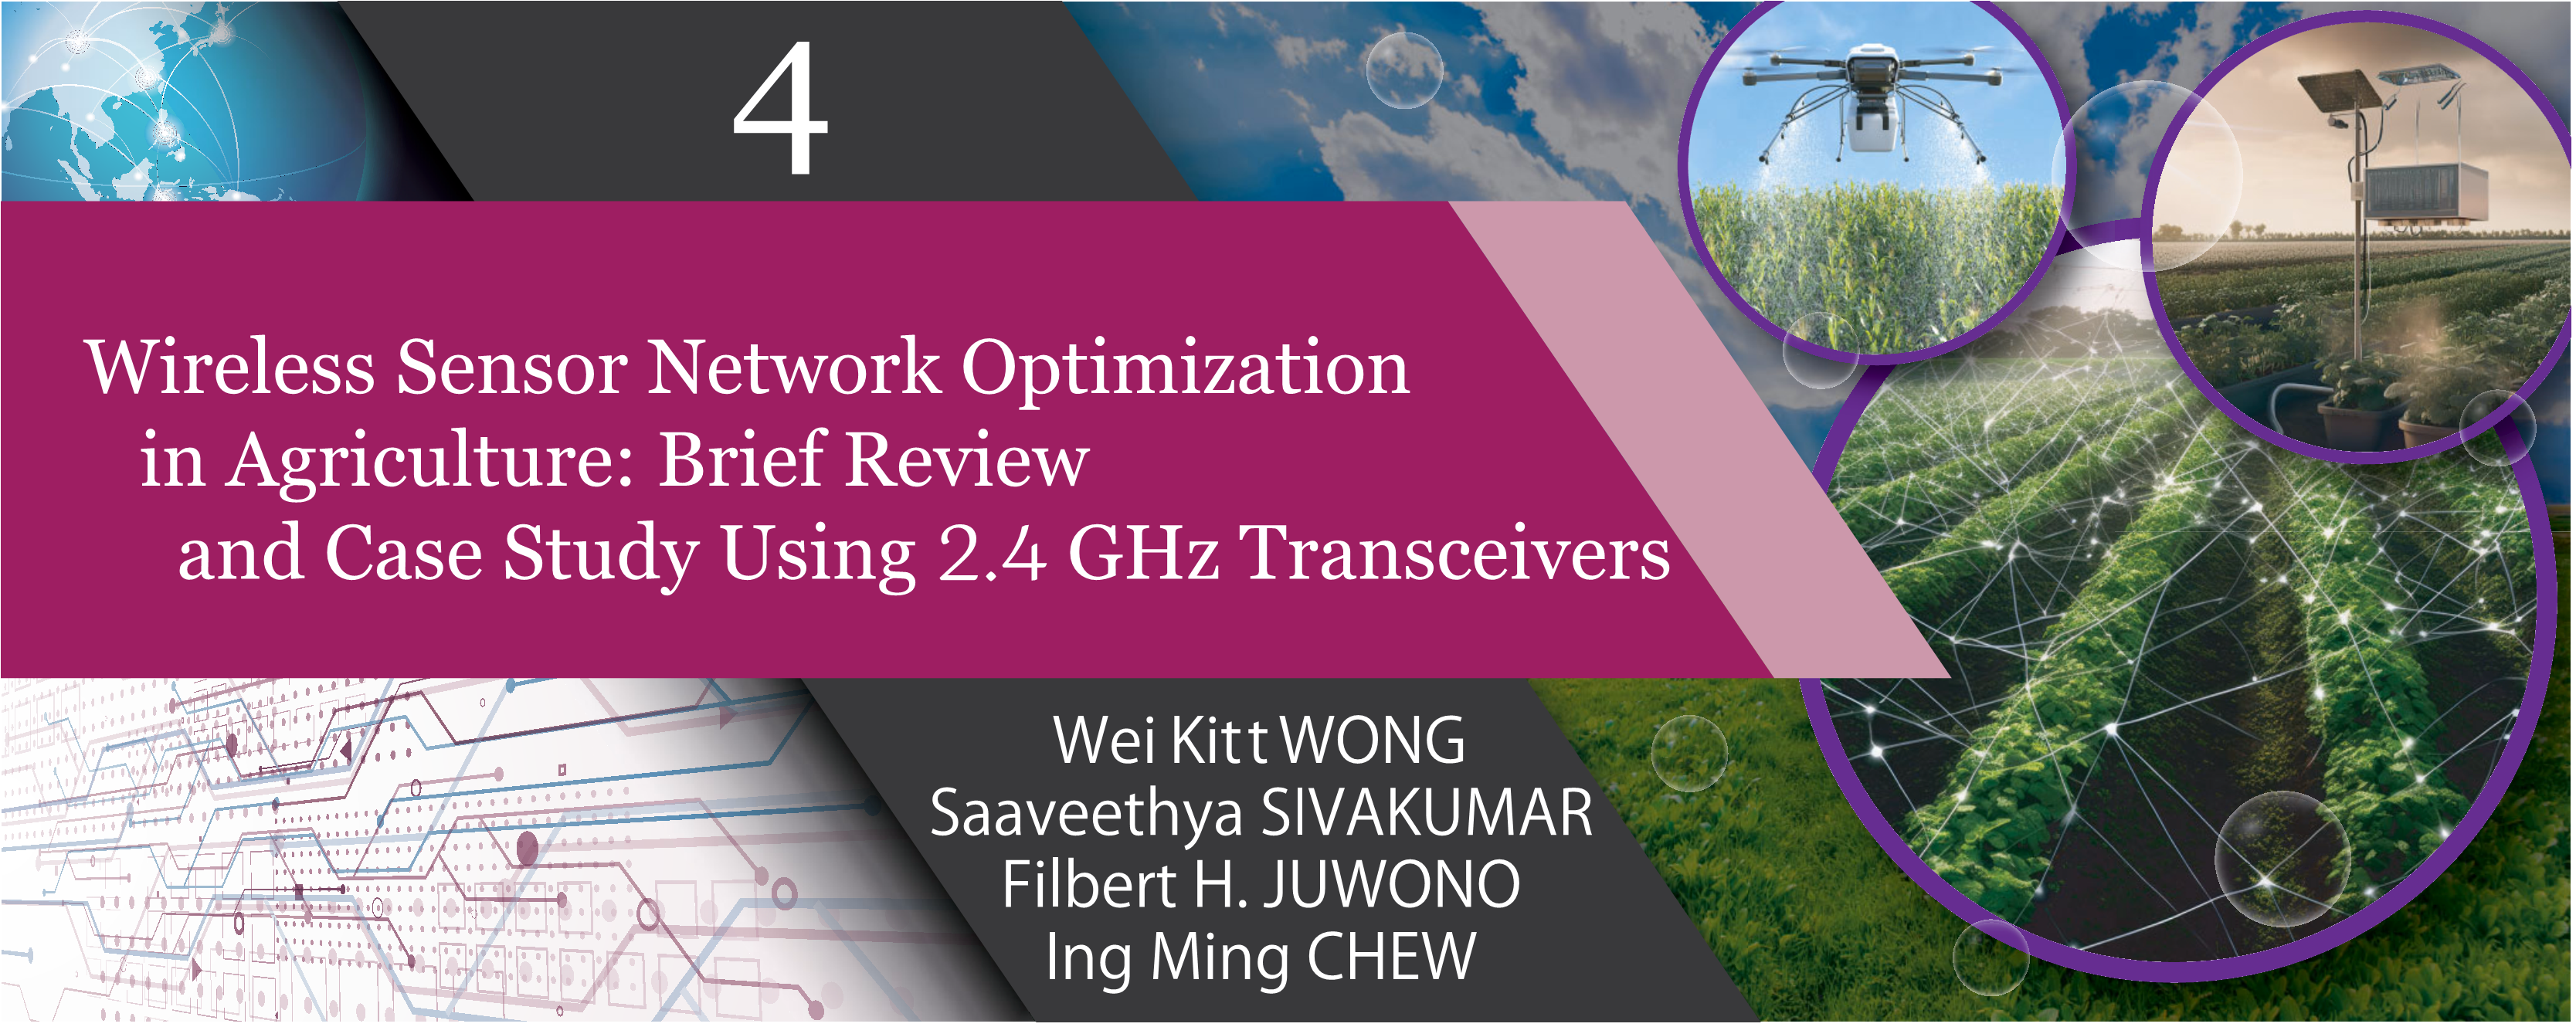 Special Section on 4. Wireless Sensor Network Optimization in Agriculture:Brief Review and Case Study Using 2.4GHz Transceivers Wei Kitt WONG Saaveethya SIVAKUMAR Filbert H. JUWONO Ing Ming CHEW